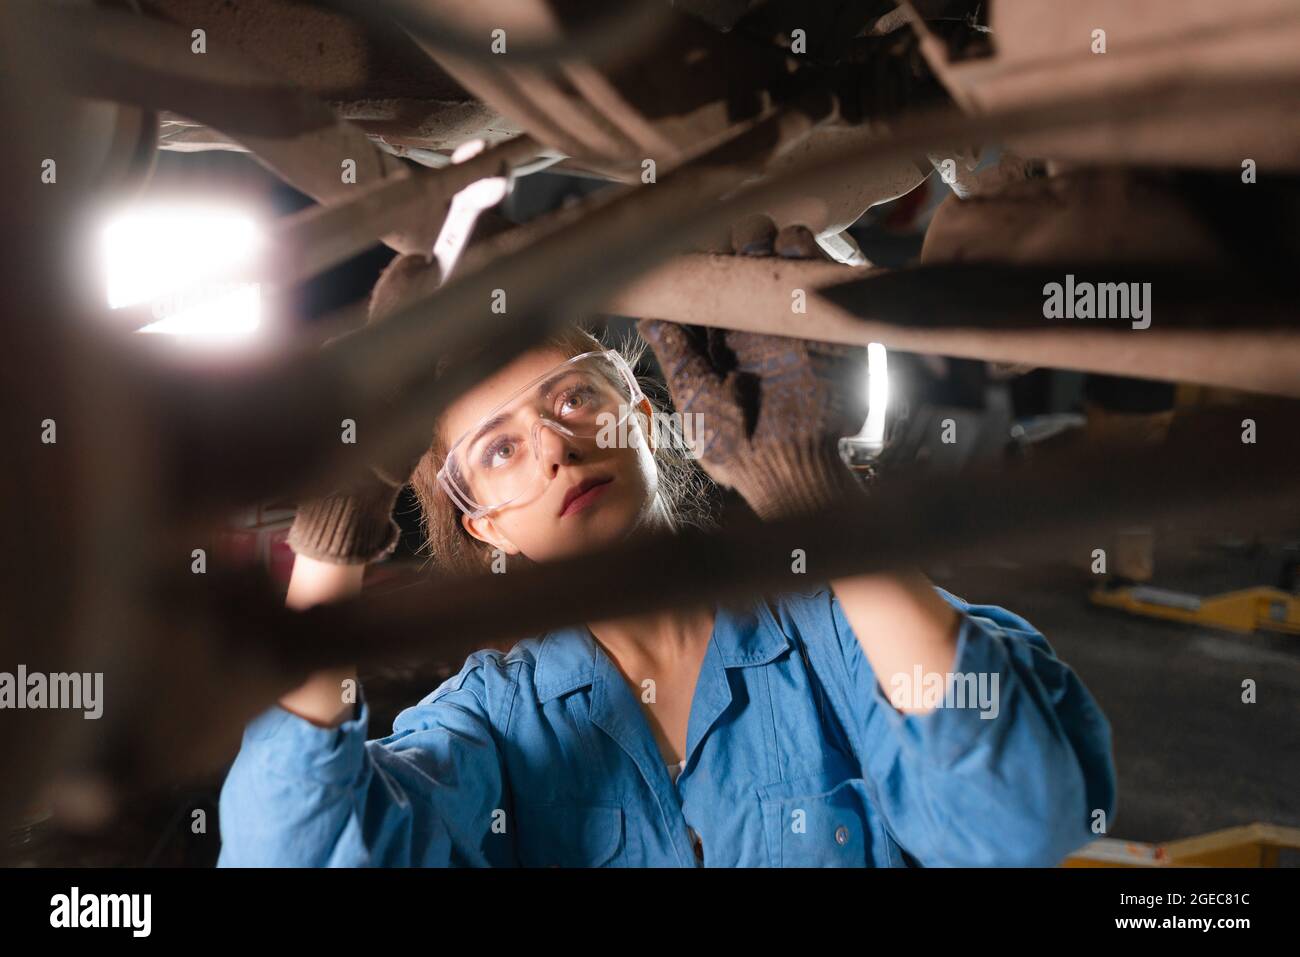 Portrait of a young woman car mechanic makes car repairs. Using a wrench, unscrews the nut. Stock Photo